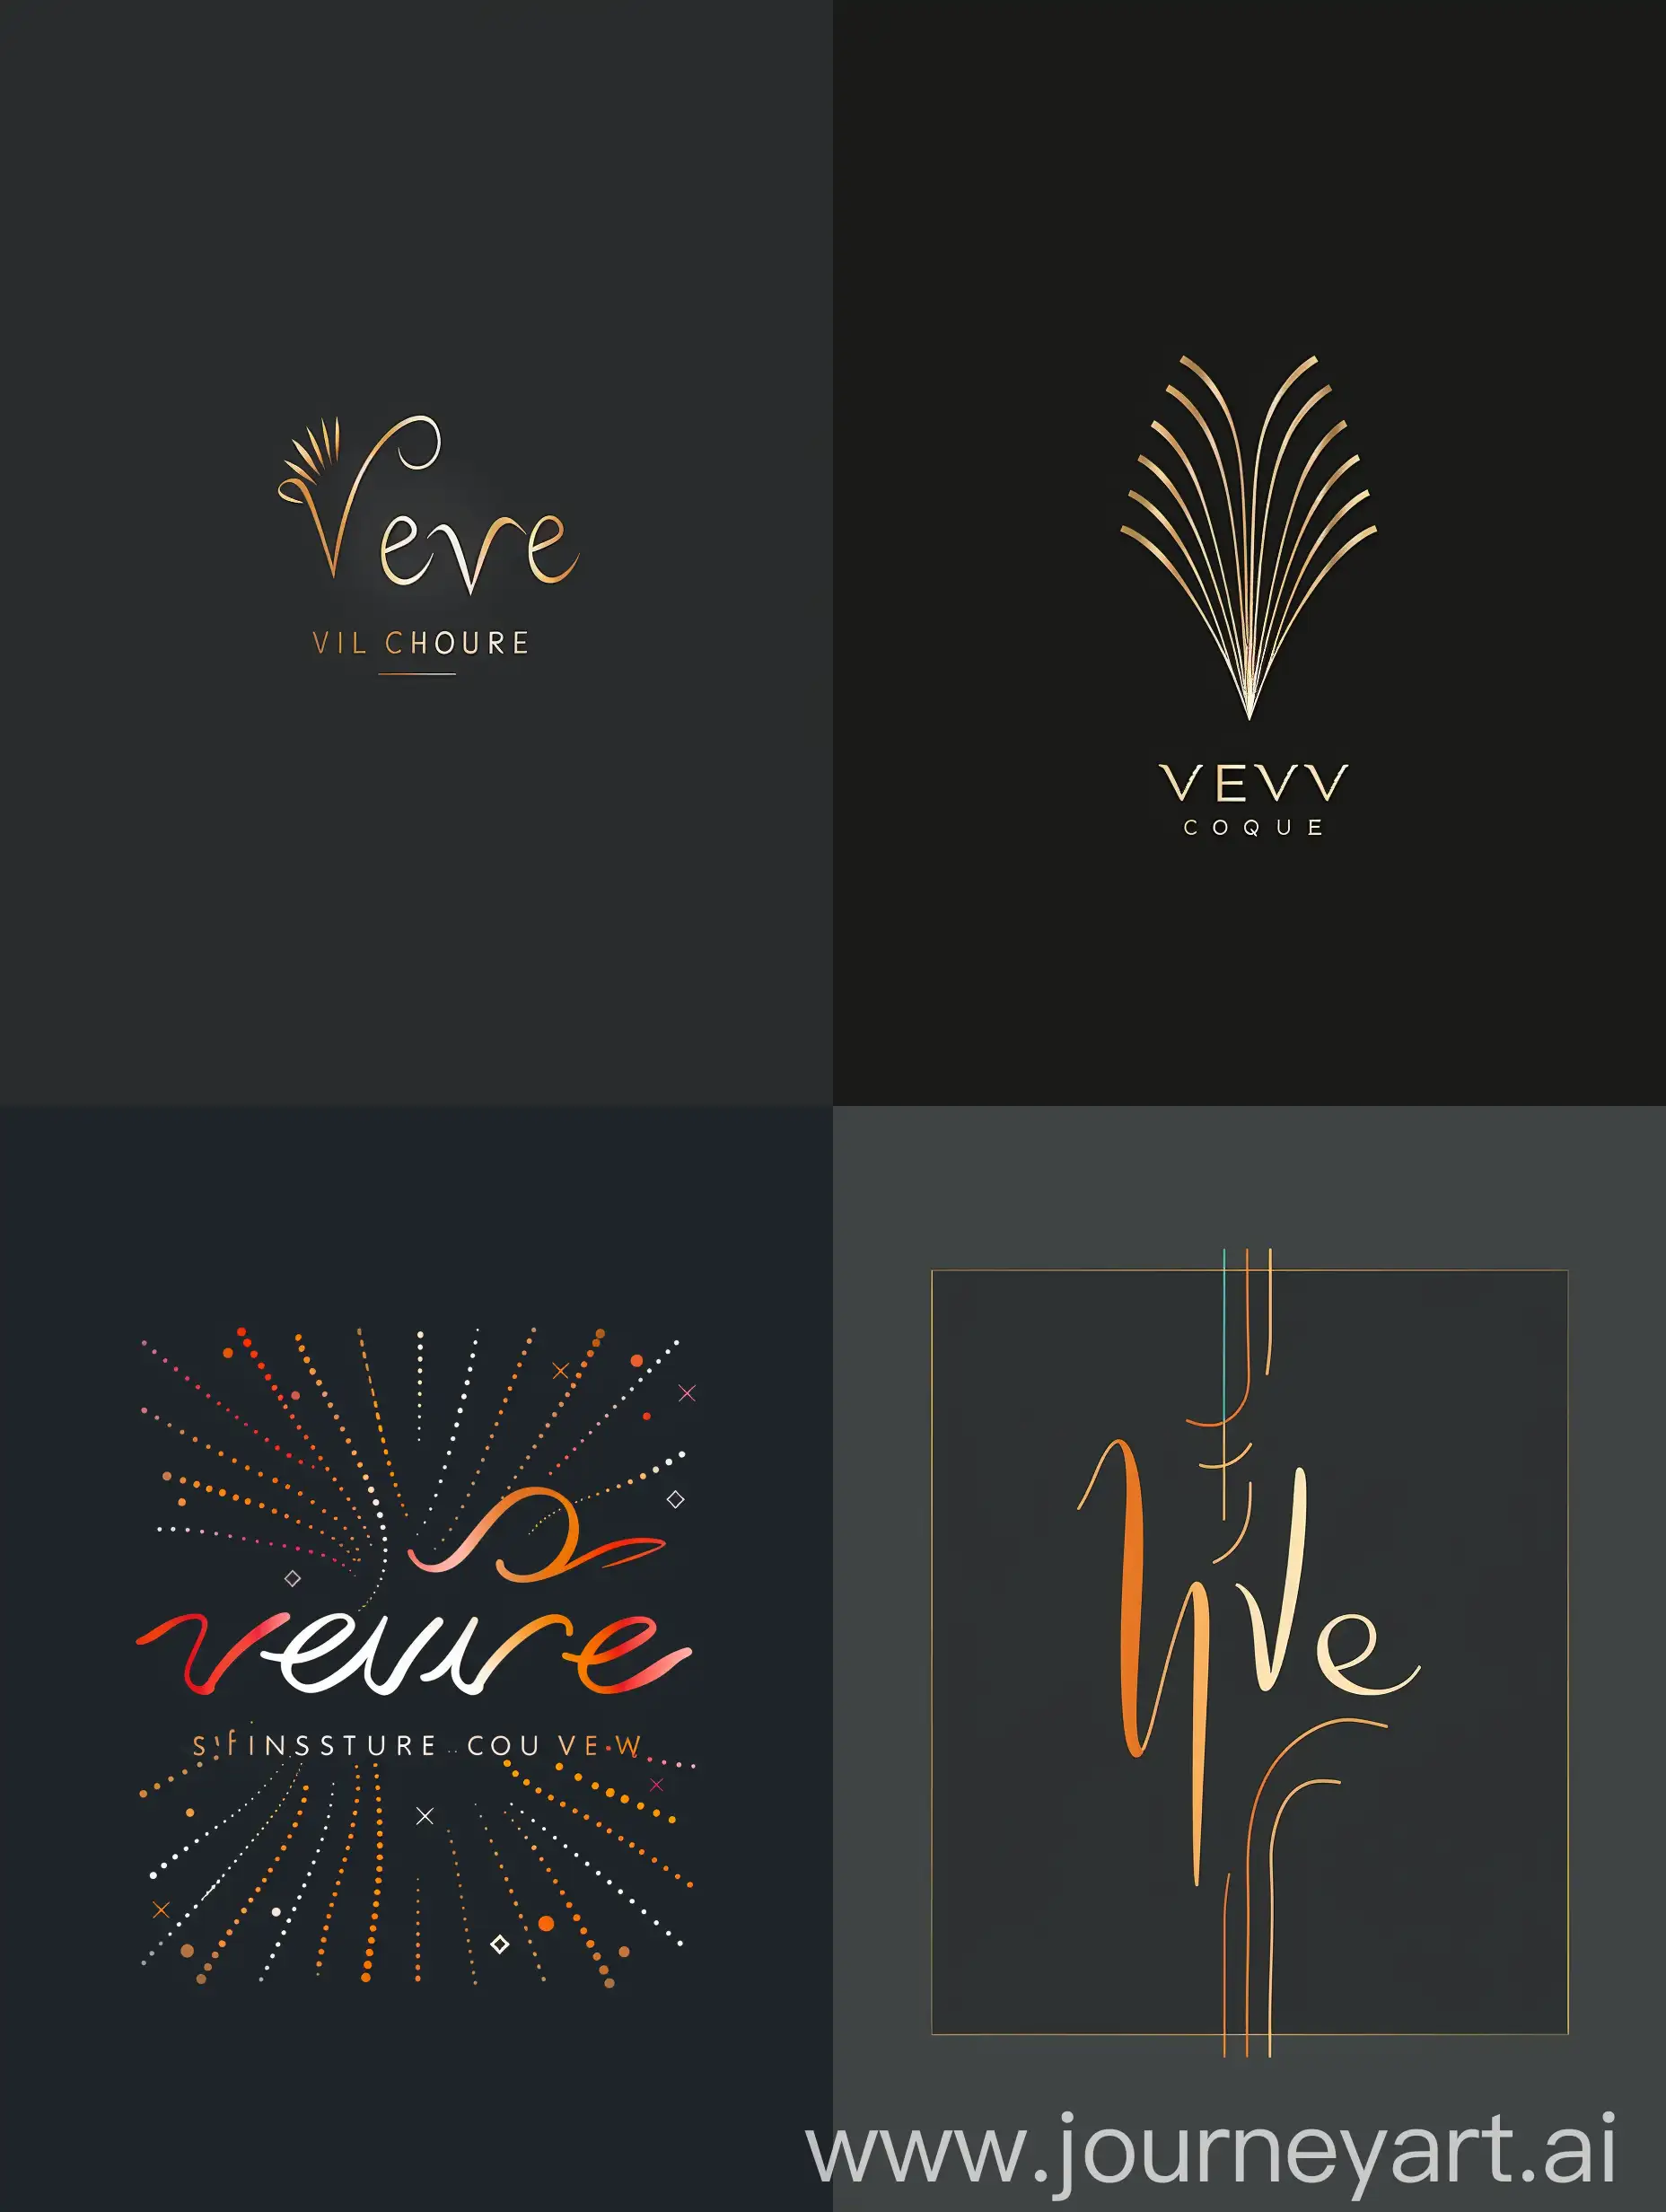 **Verve Couture**: I designed a modern logo that combines elegant writing and simple symbols that express vitality and distinction, with the use of contrasting colors that attract attention.